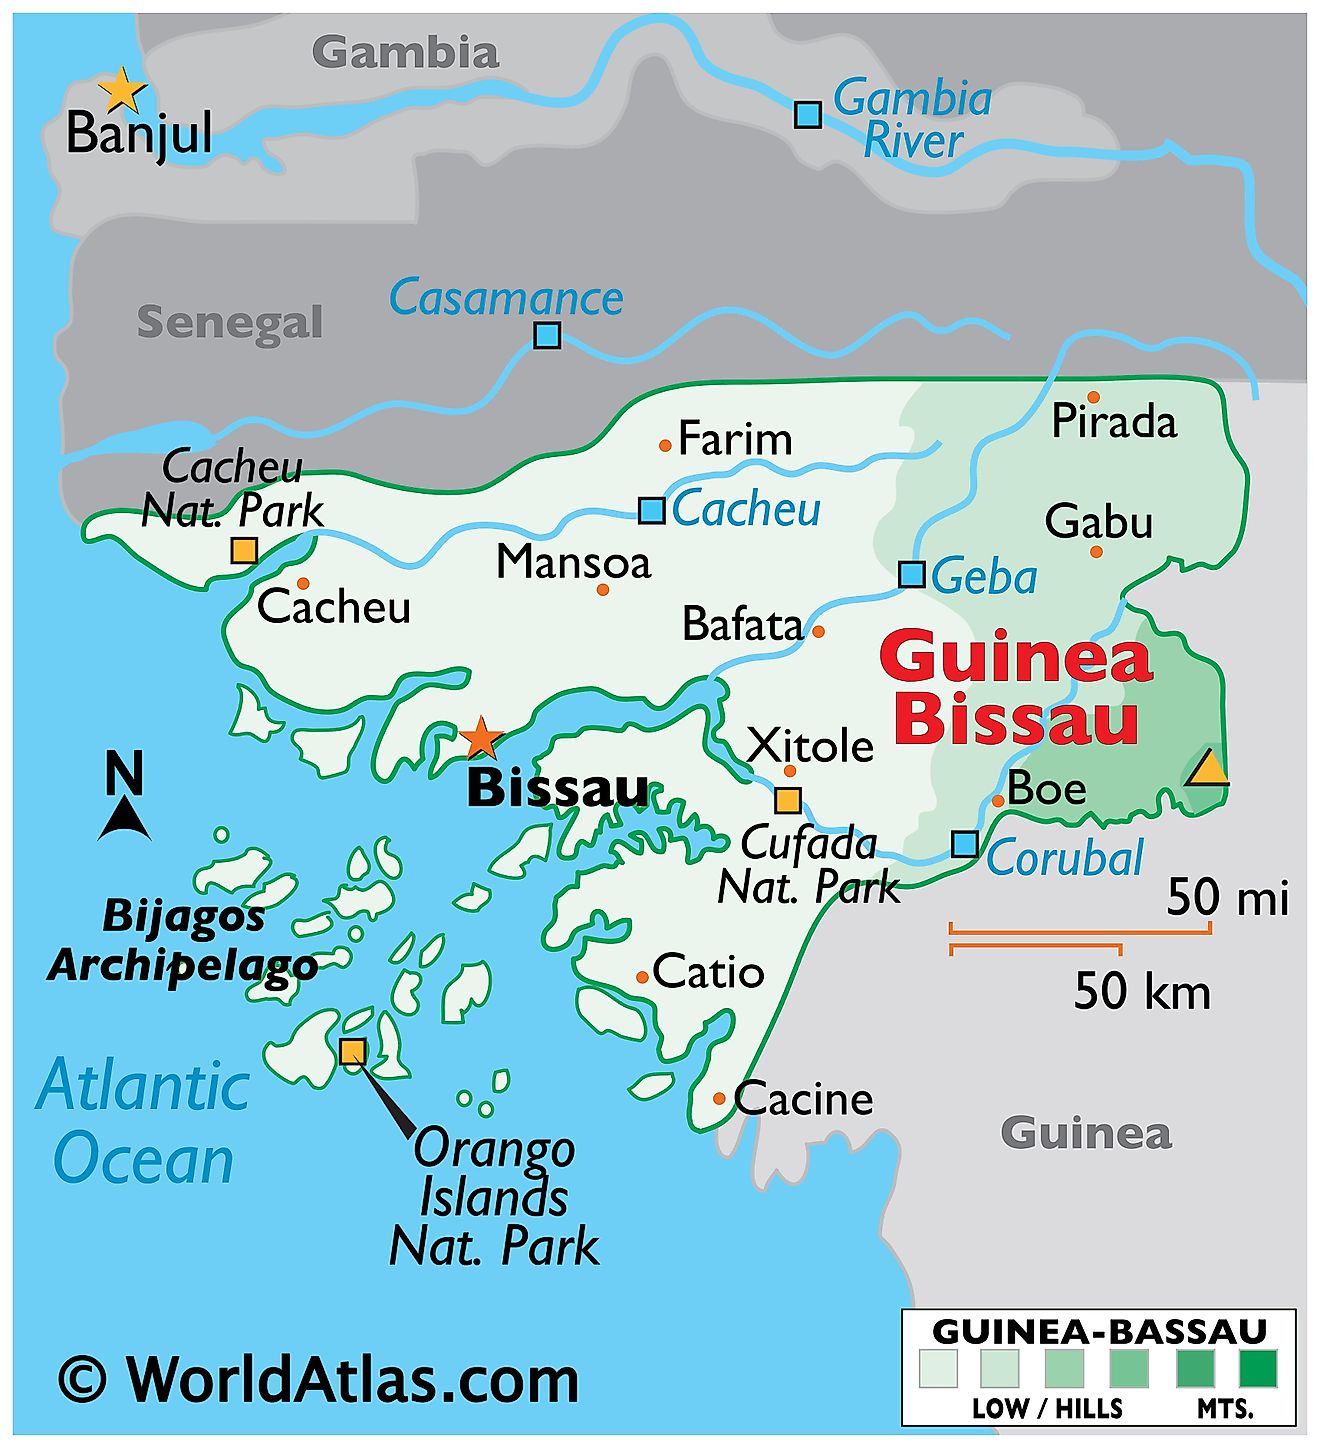 Physical Map of Guinea Bissau with state boundaries. It shows the physical features of Guinea-Bissau including terrain, rivers, islands, protected areas, and major cities.